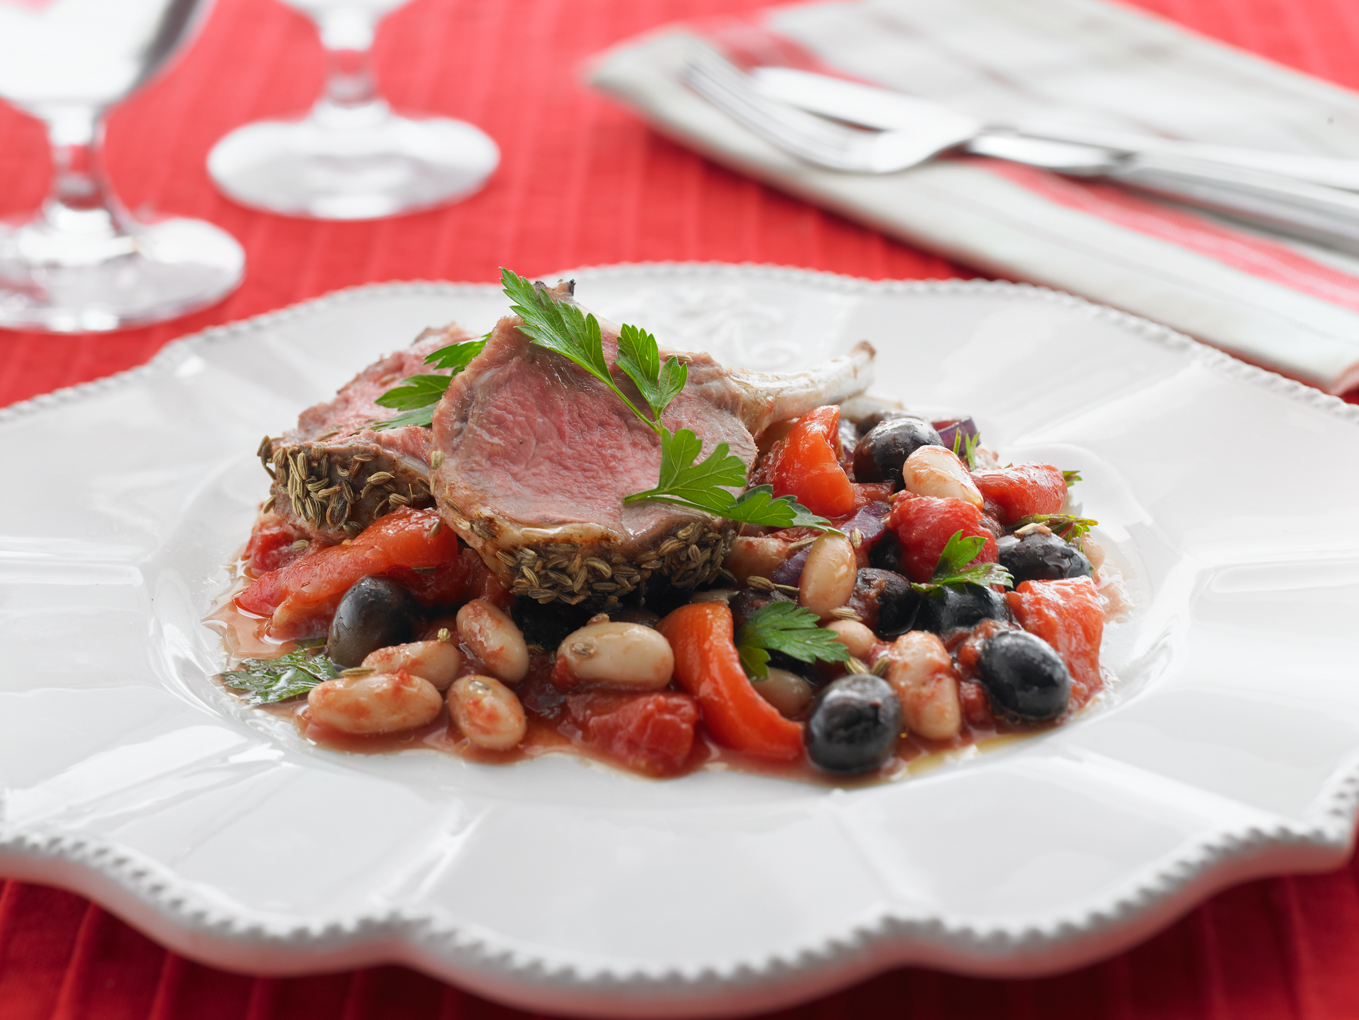 Spiced Lamb Racks with Saucy Cannellini Beans